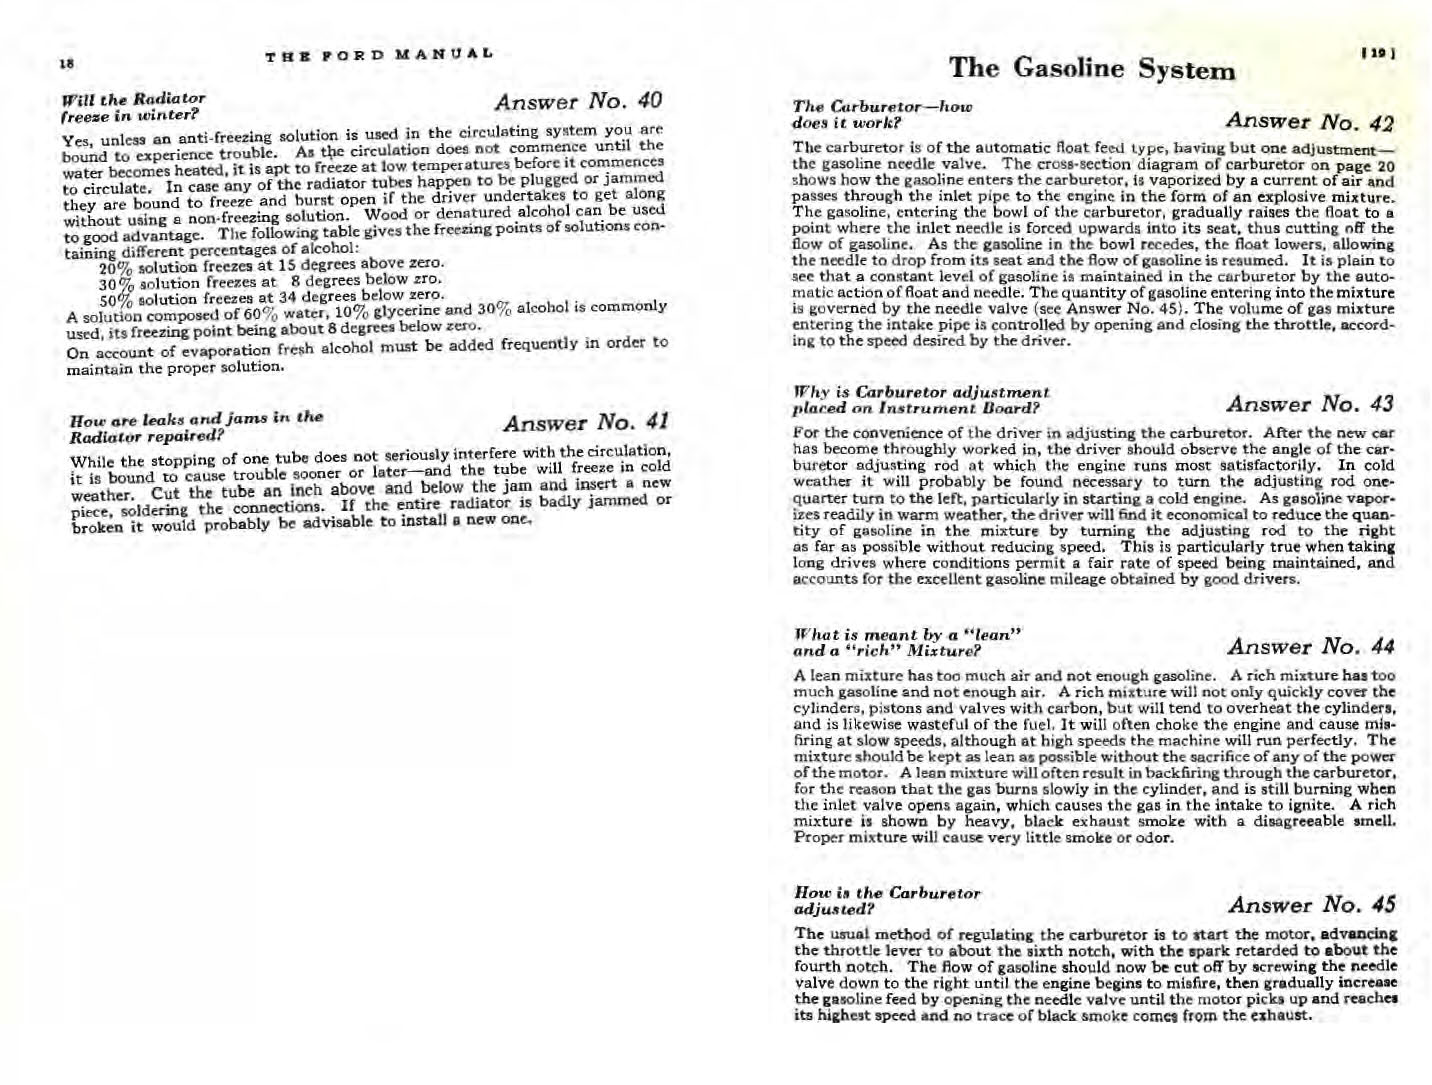 1926_Ford_Owners_Manual-18-19